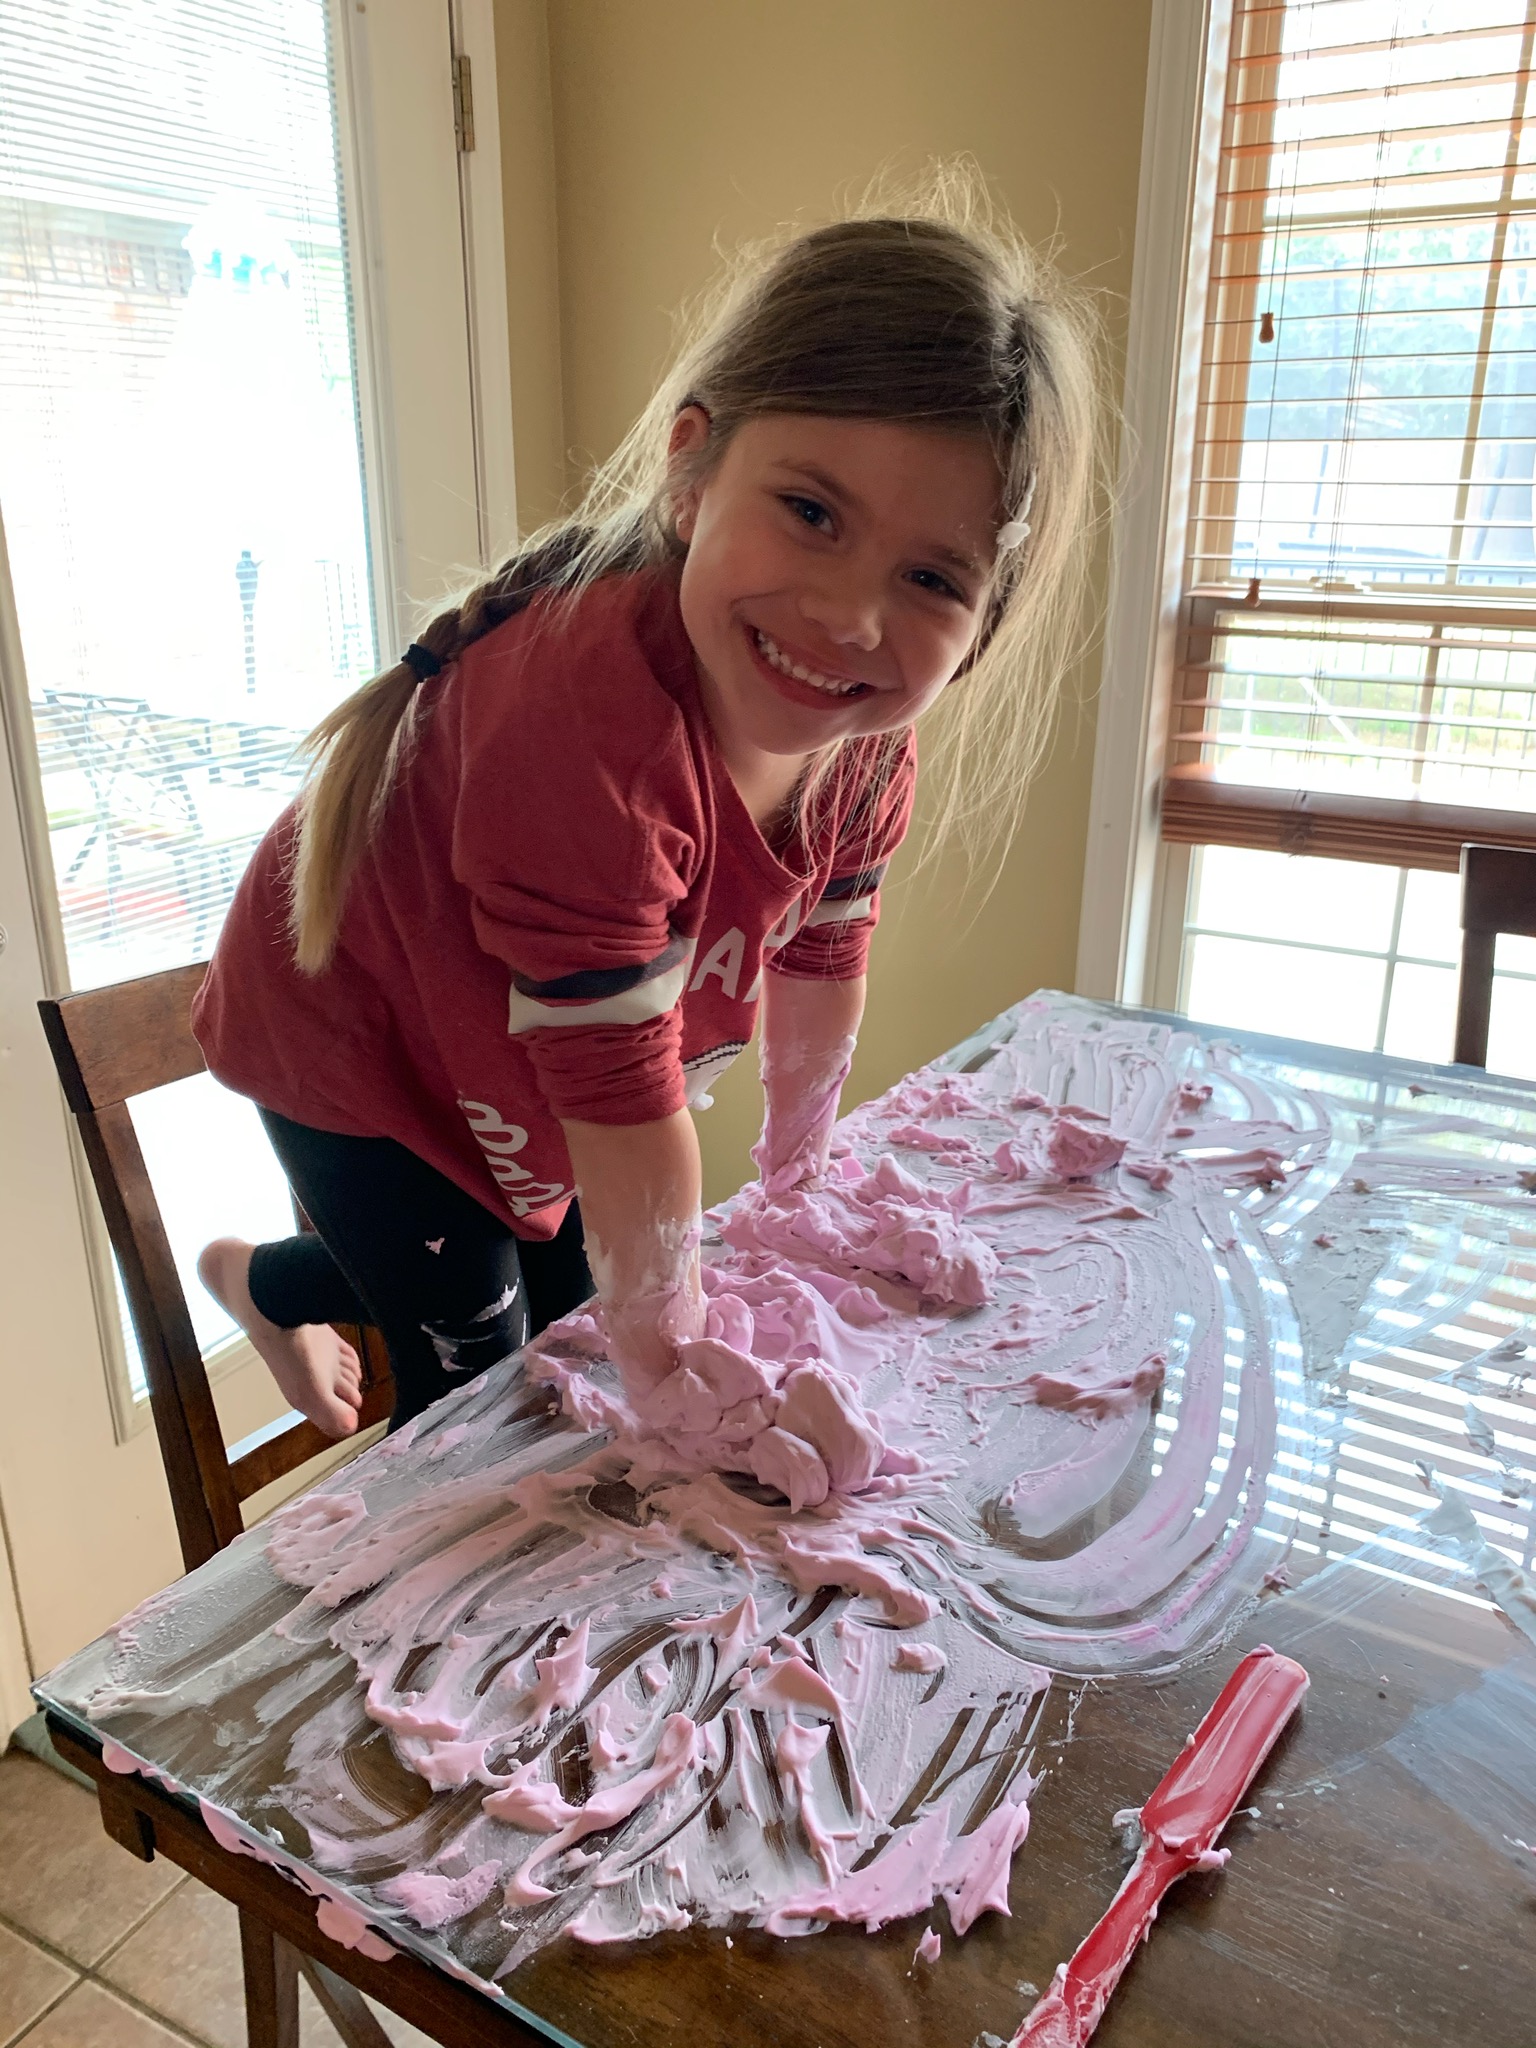 Here is a fun sensory (and writing!) preschool activity - you might have the materials on hand: Spread a little shaving cream on the table, and encourage writing letters, a name, or just drawing. This one has it all: it cleans the table and smells great as bonuses! Supervision needed. 